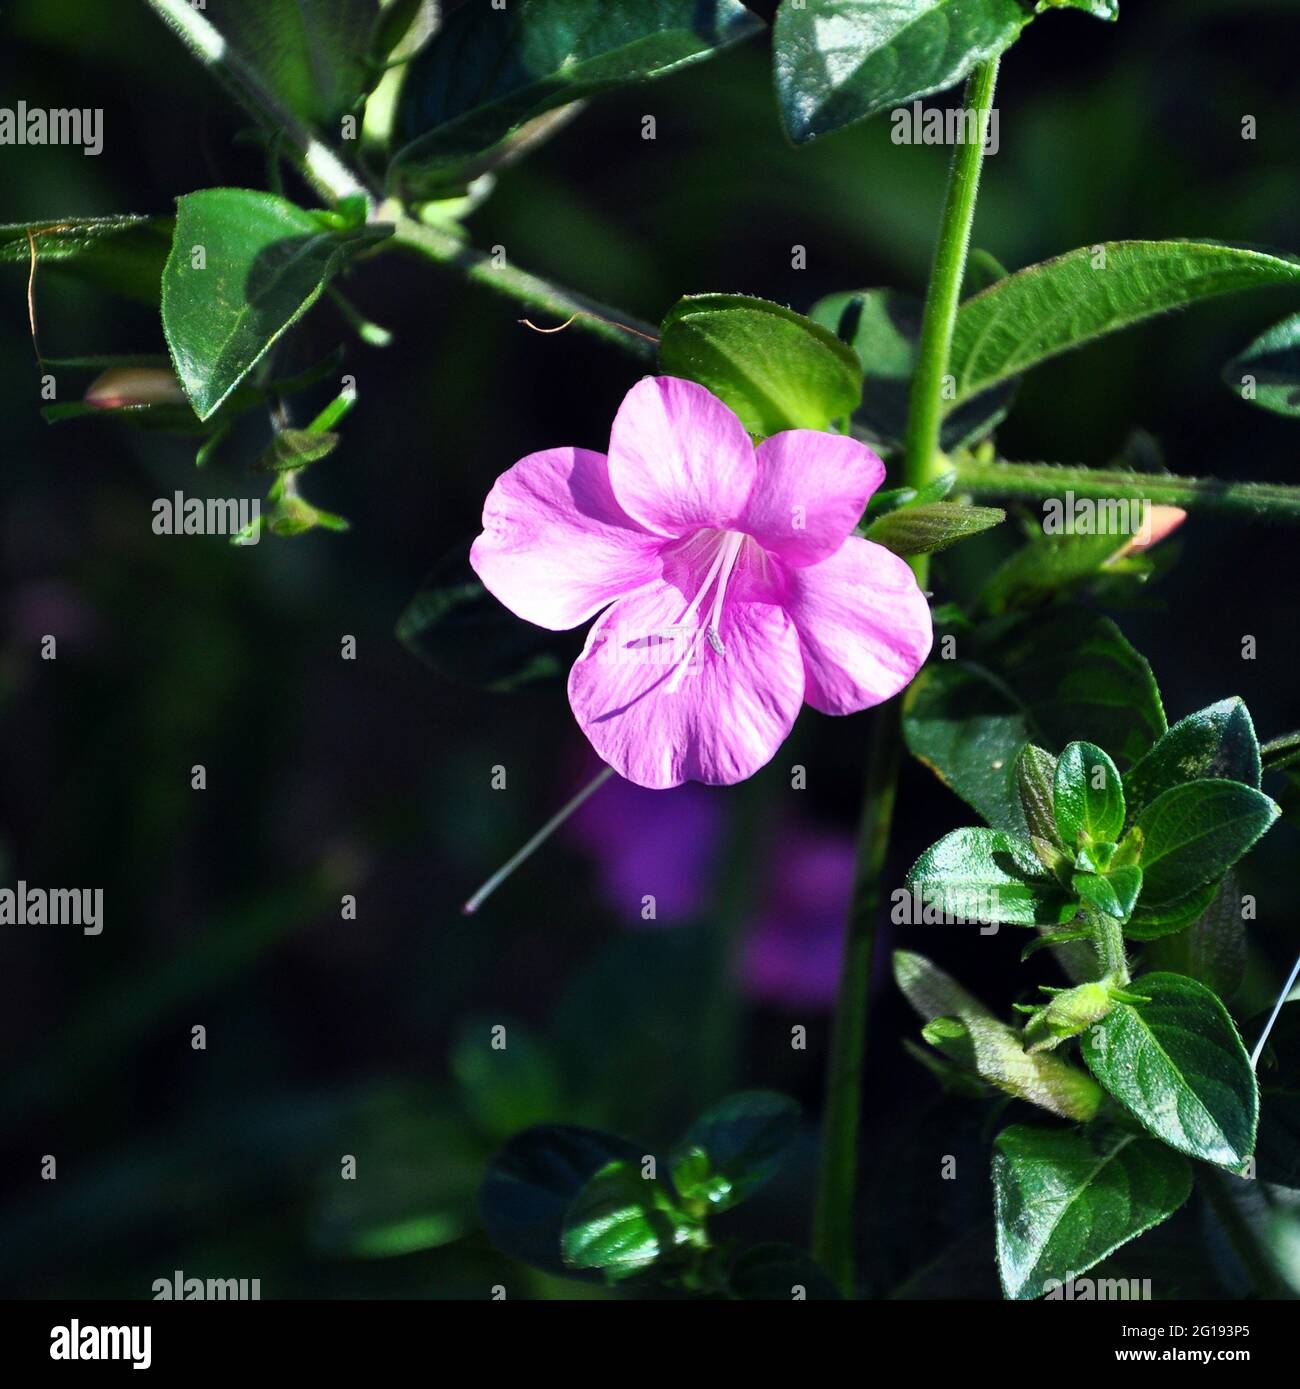 A closeup shot of blooming Barleria flowers in the greenery Stock Photo